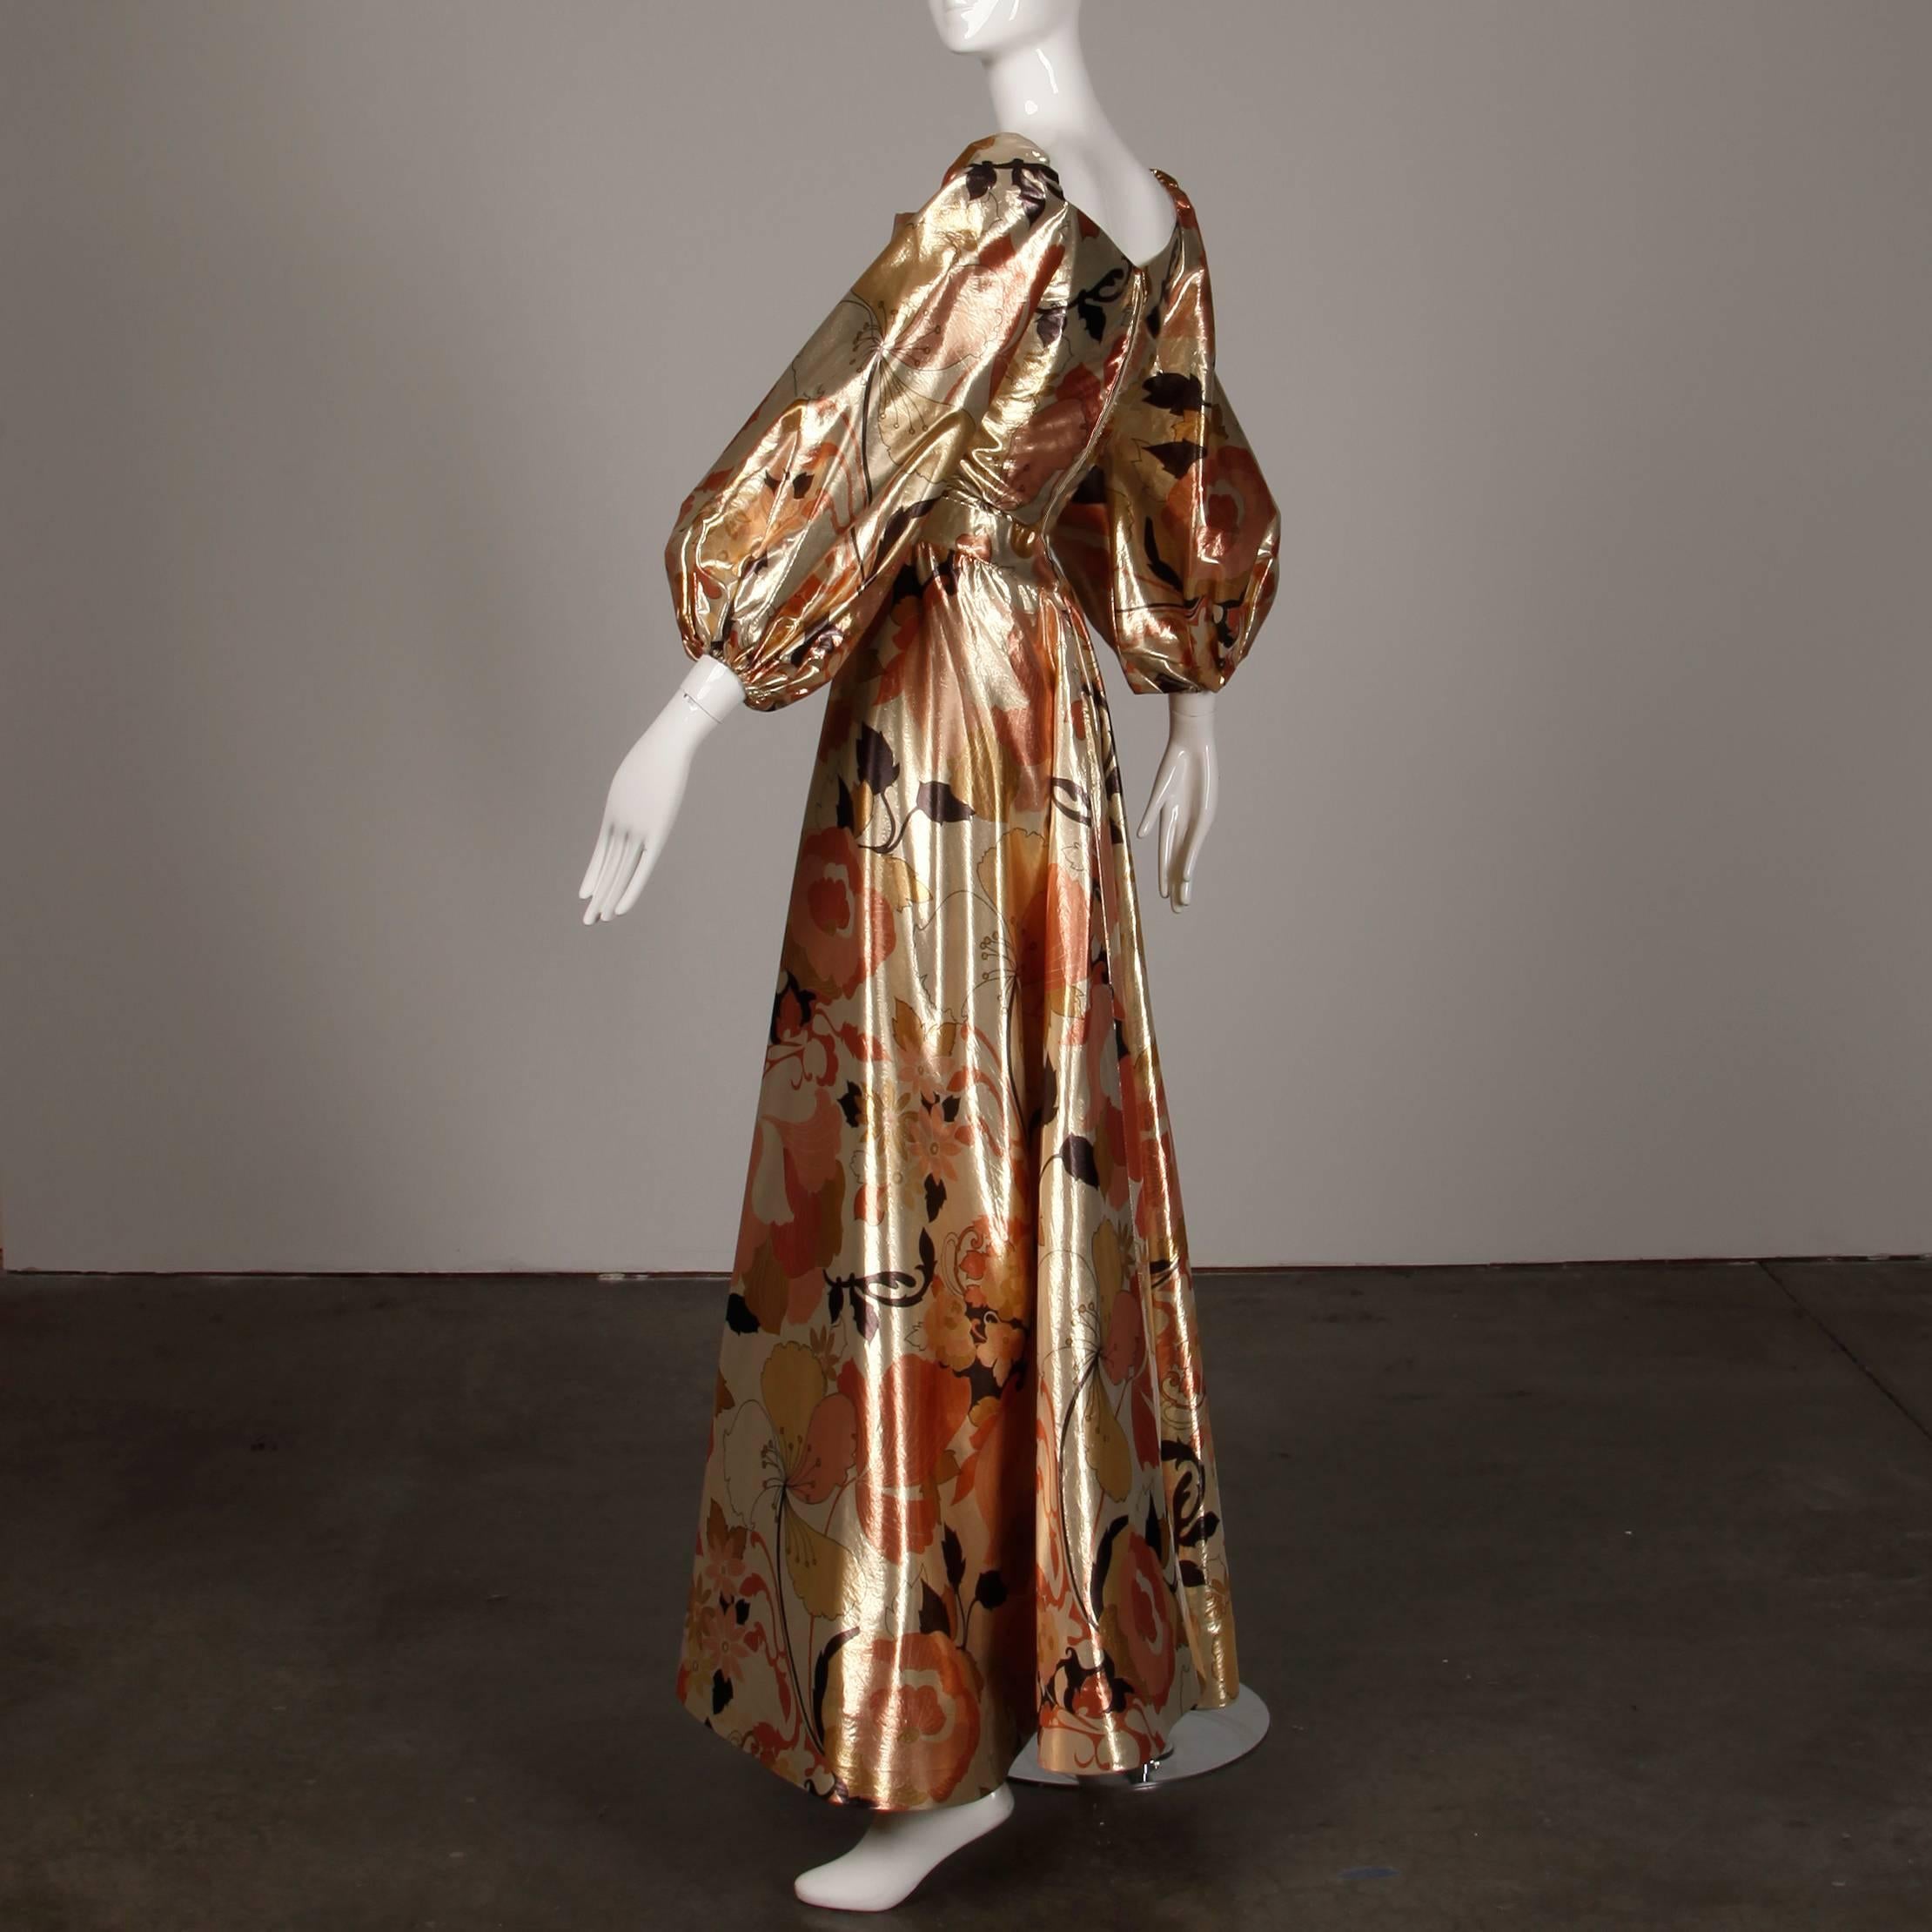 1970s Arnold Scaasi Vintage Metallic Gold Lamé Silk Dress/ Gown (Skirt + Top) For Sale 1